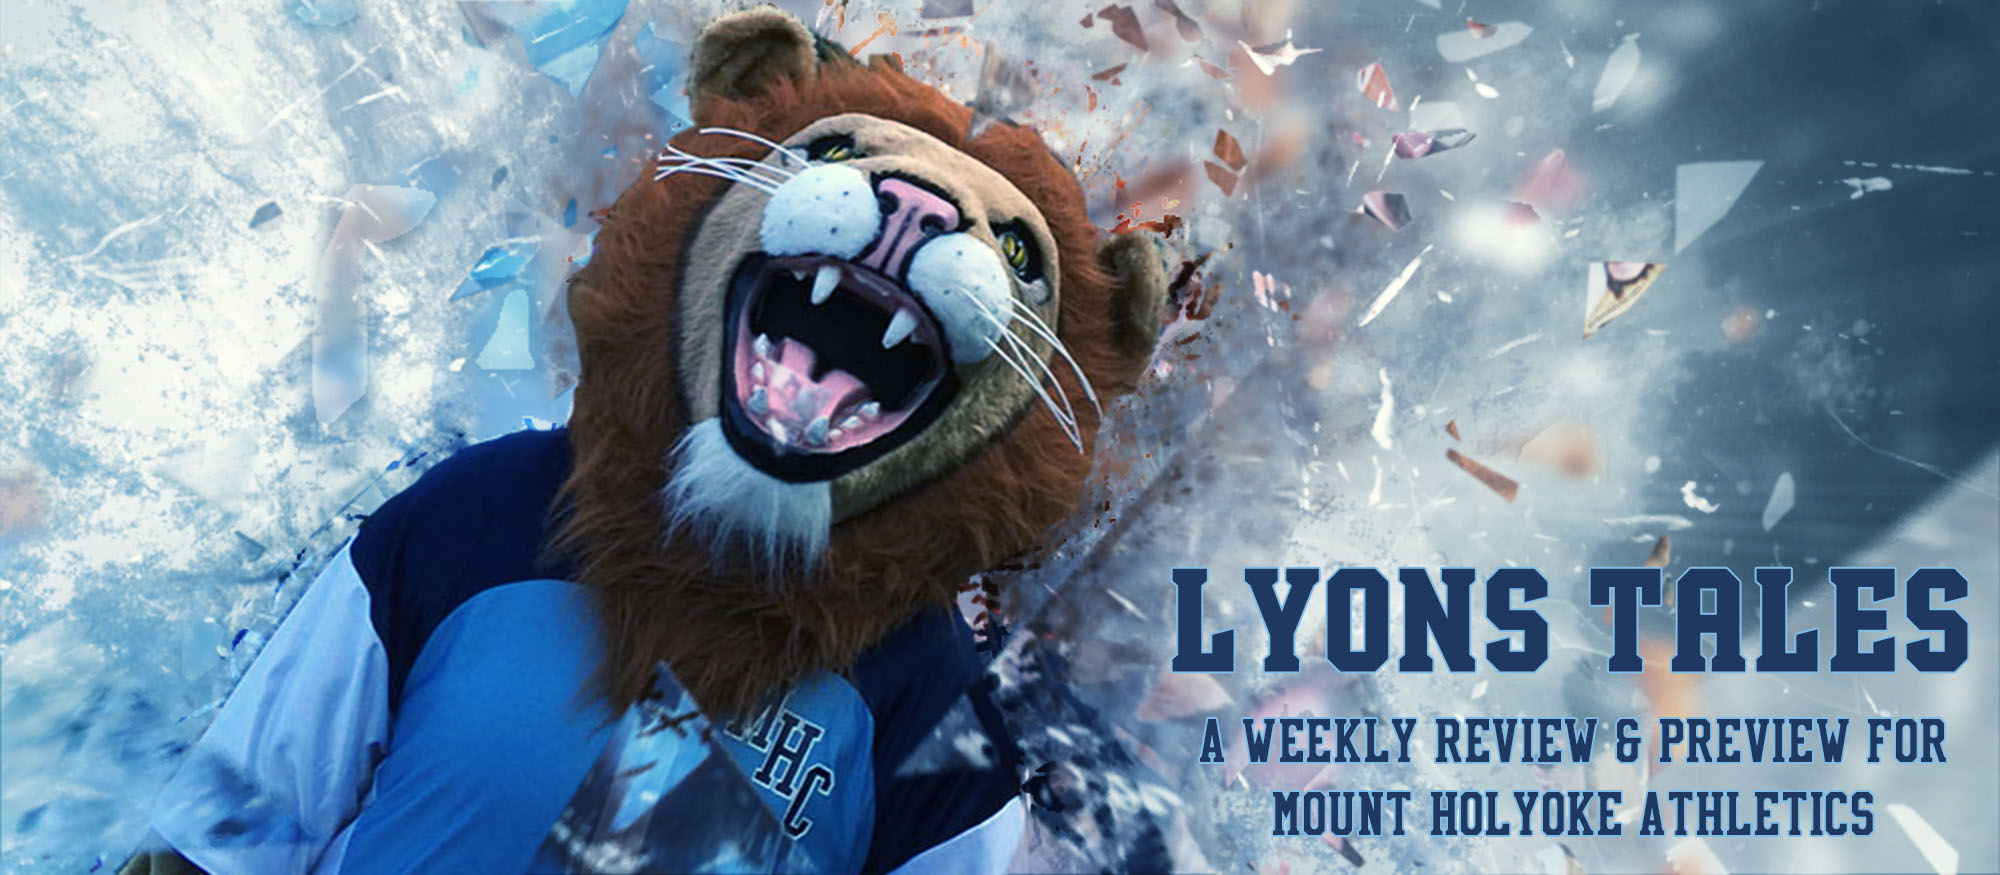 Preview photo for the Athletics Weekly Newsletter, the Lyons Tales.